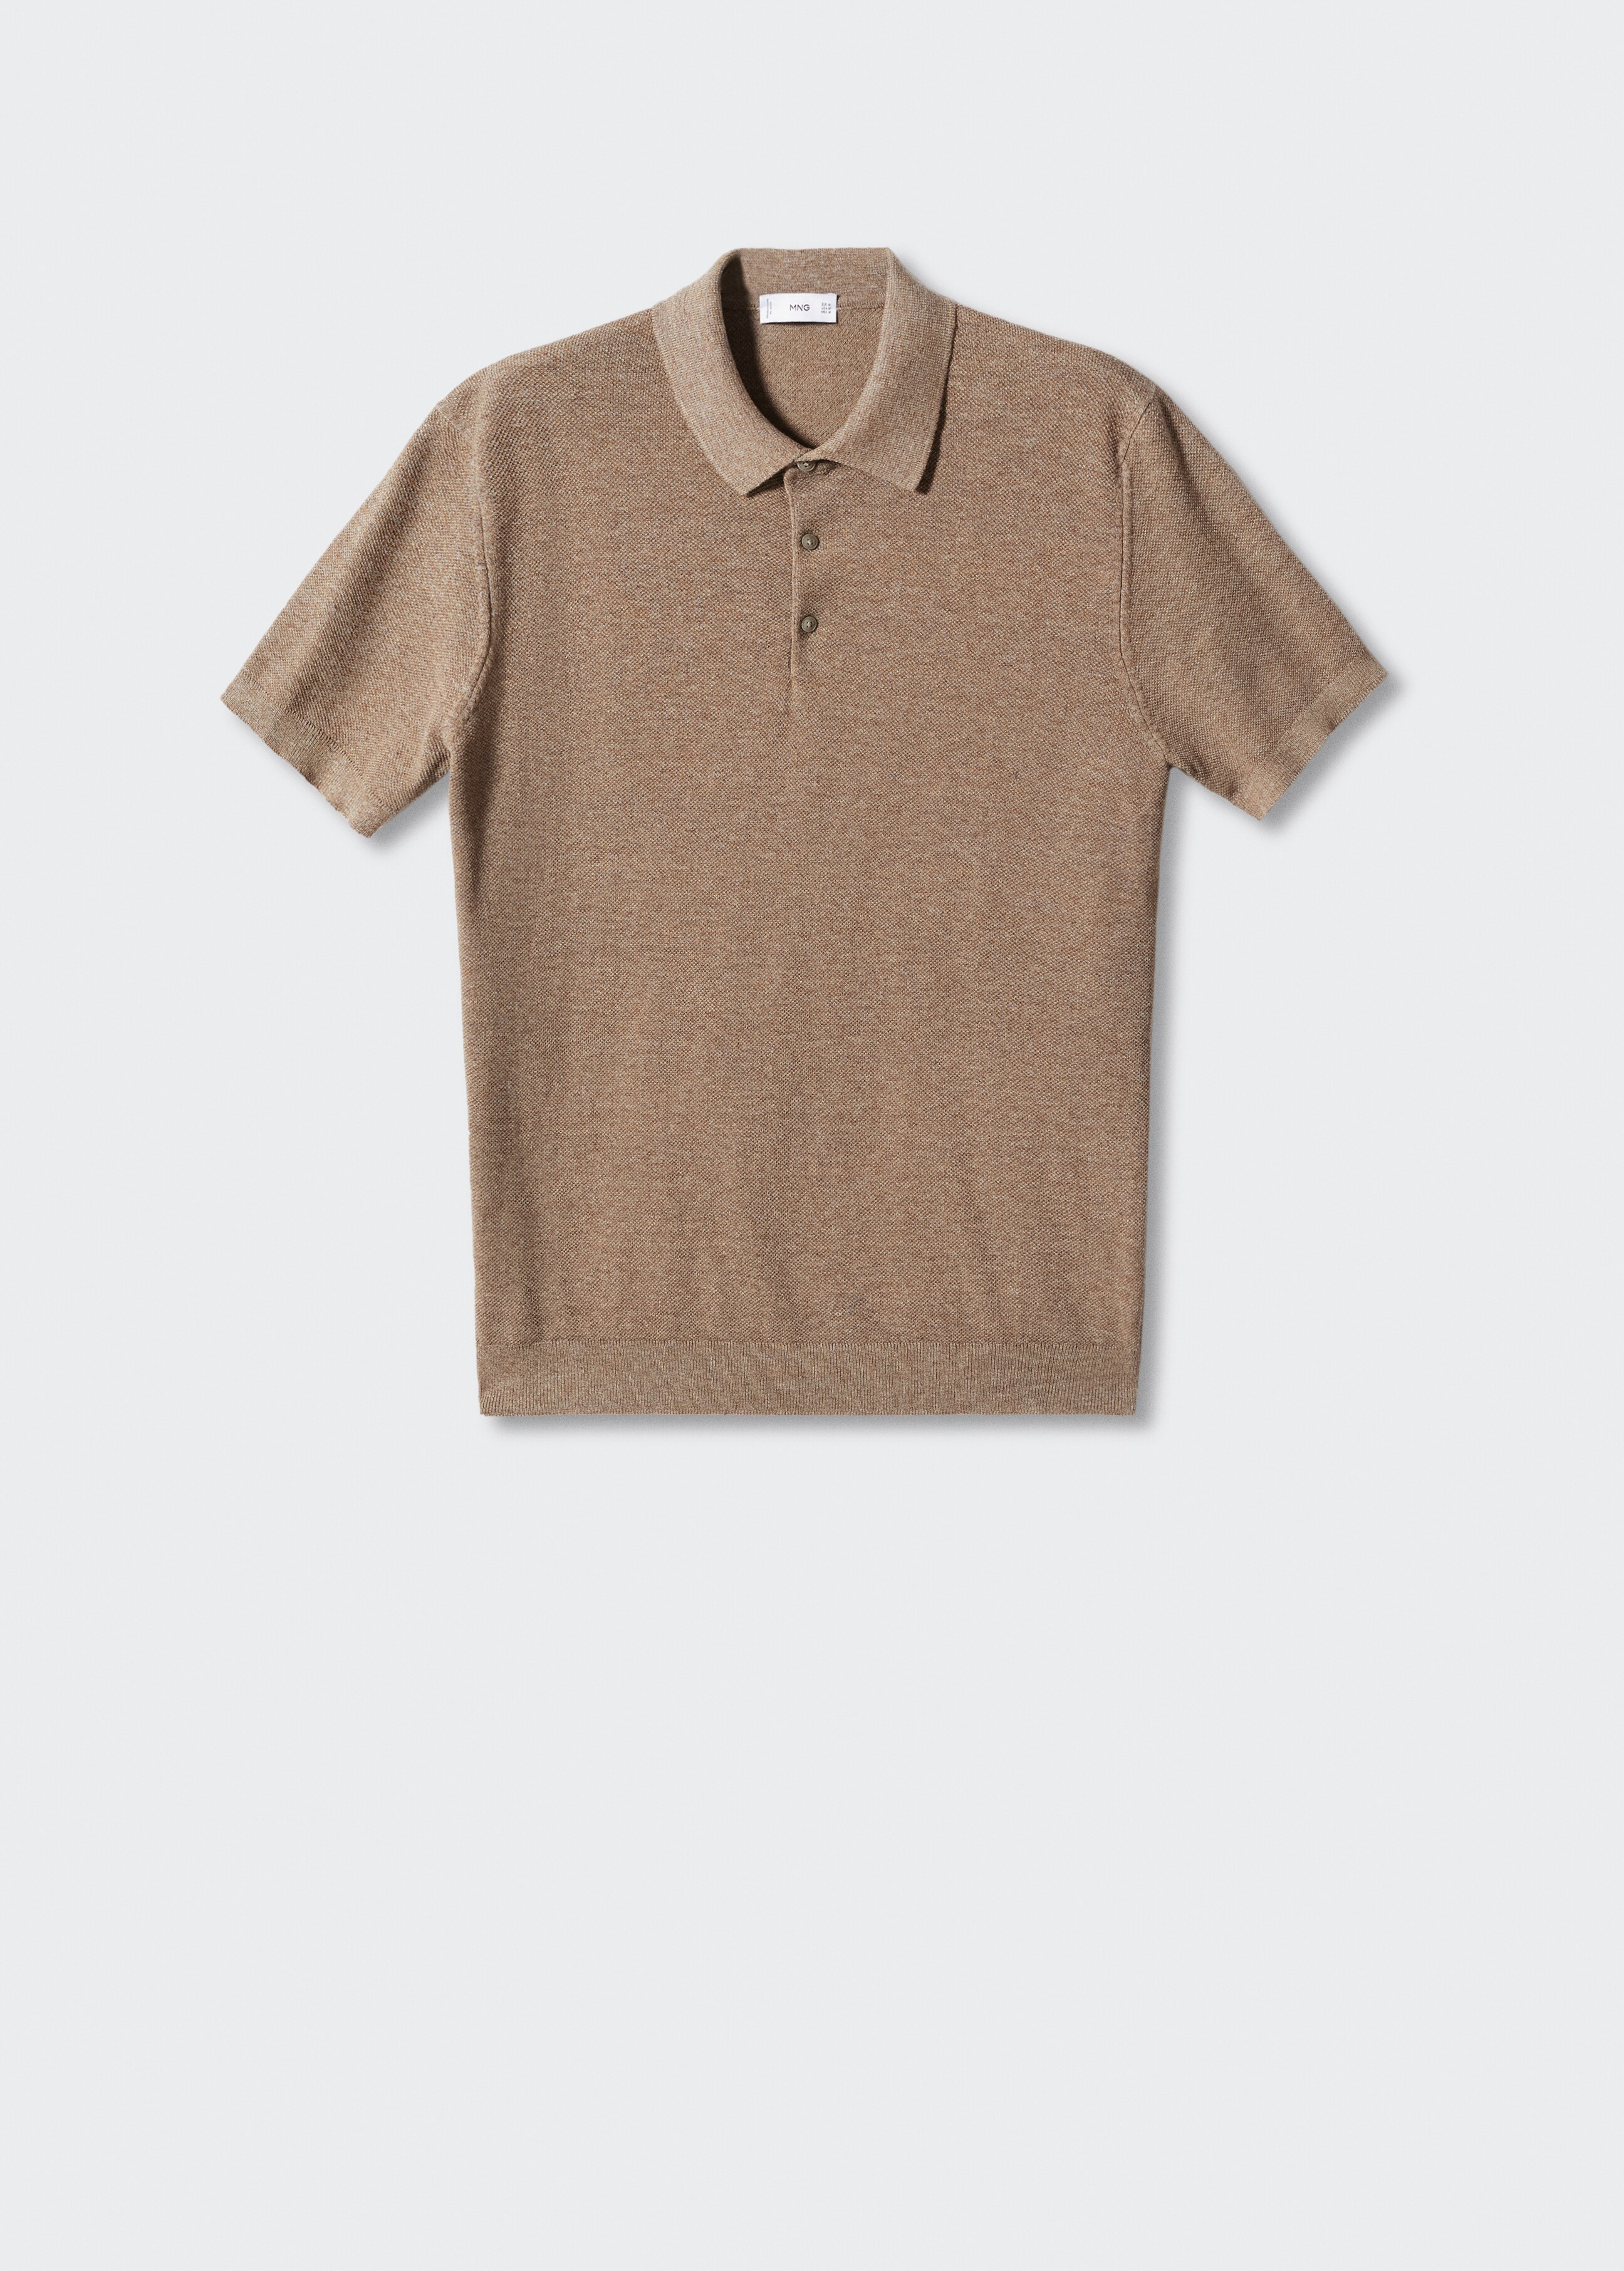 Knit cotton polo shirt - Article without model